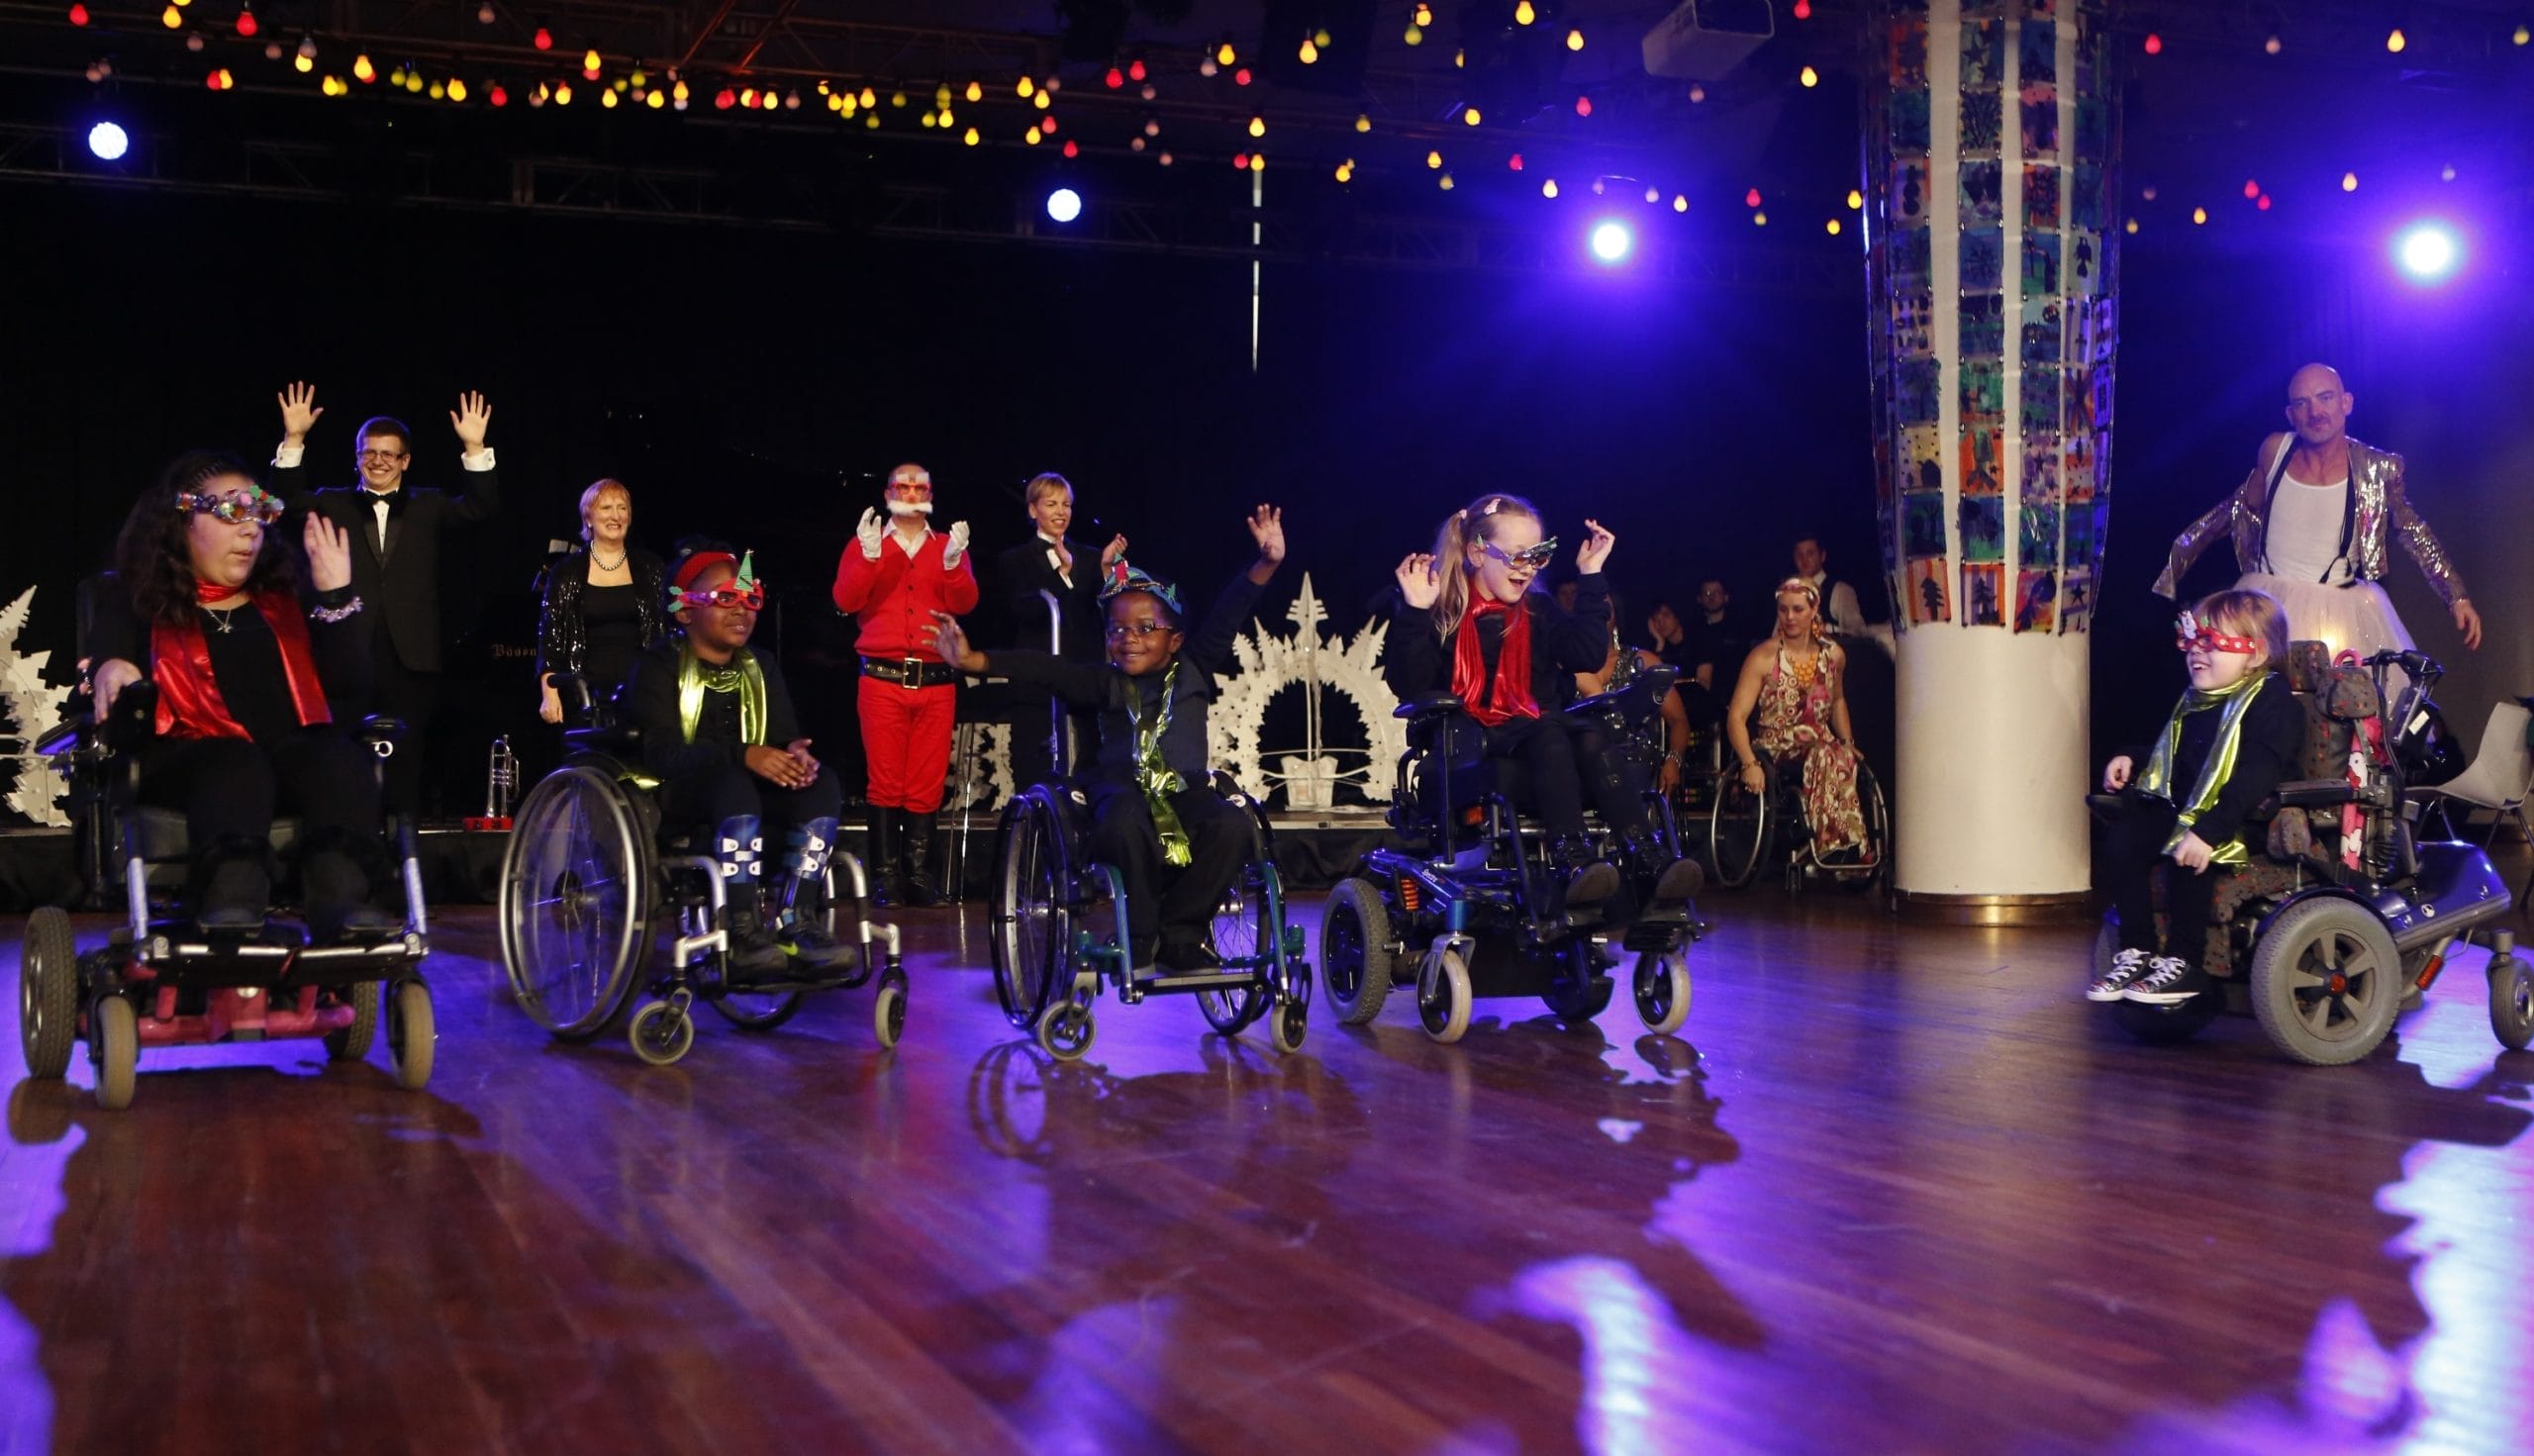 A group of young children in wheelchairs are in the middle of the performance space, they are surrounded by Christmas decorations.